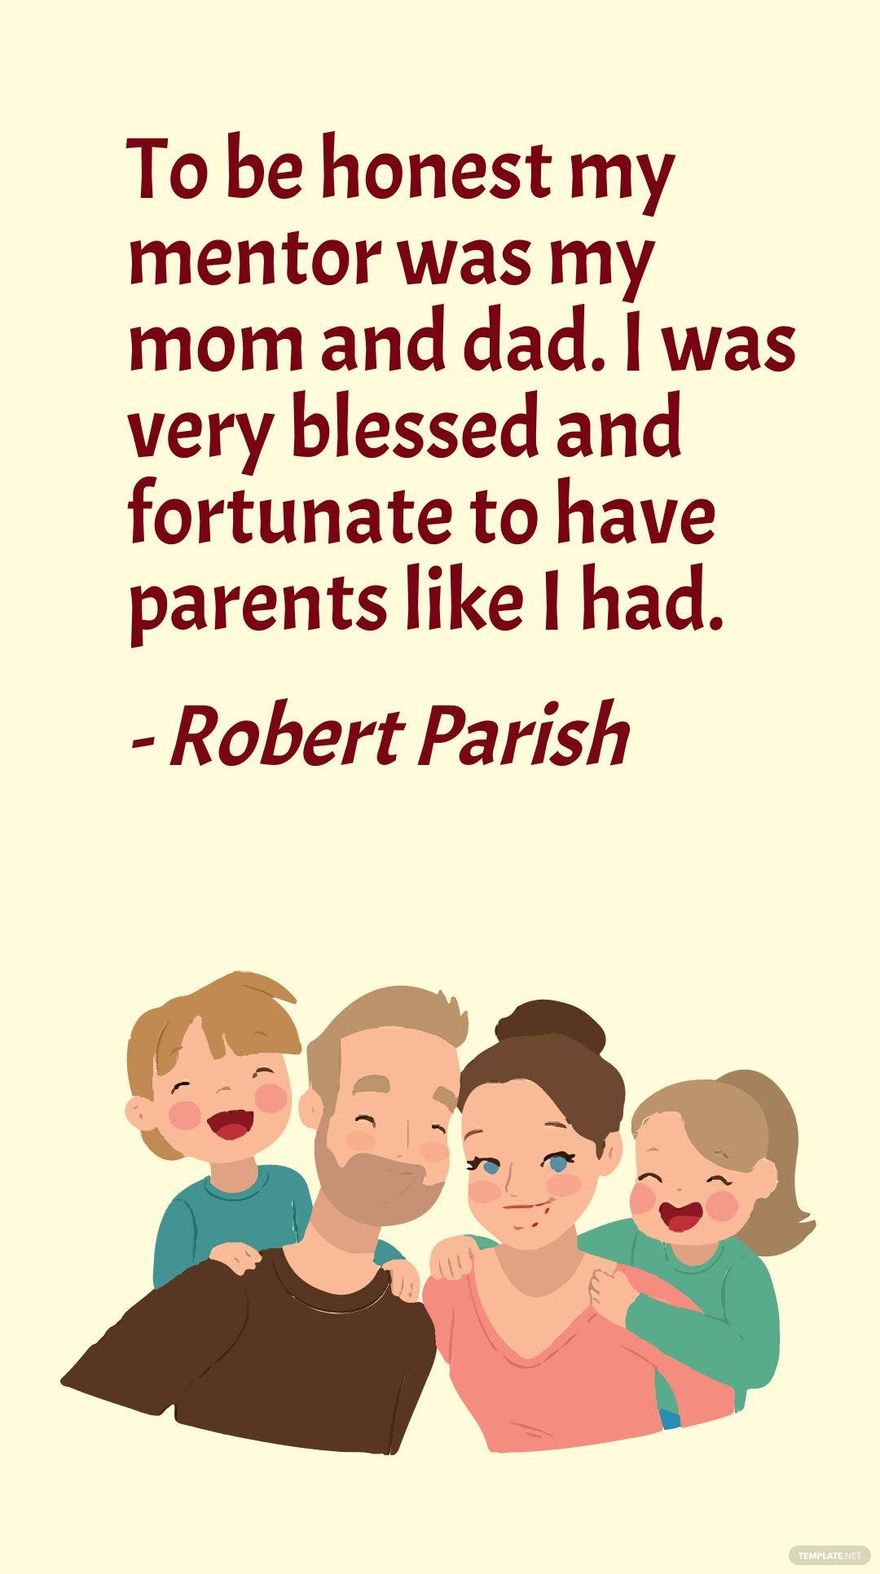 Robert Parish- To be honest my mentor was my mom and dad. I was very blessed and fortunate to have parents like I had. in JPG